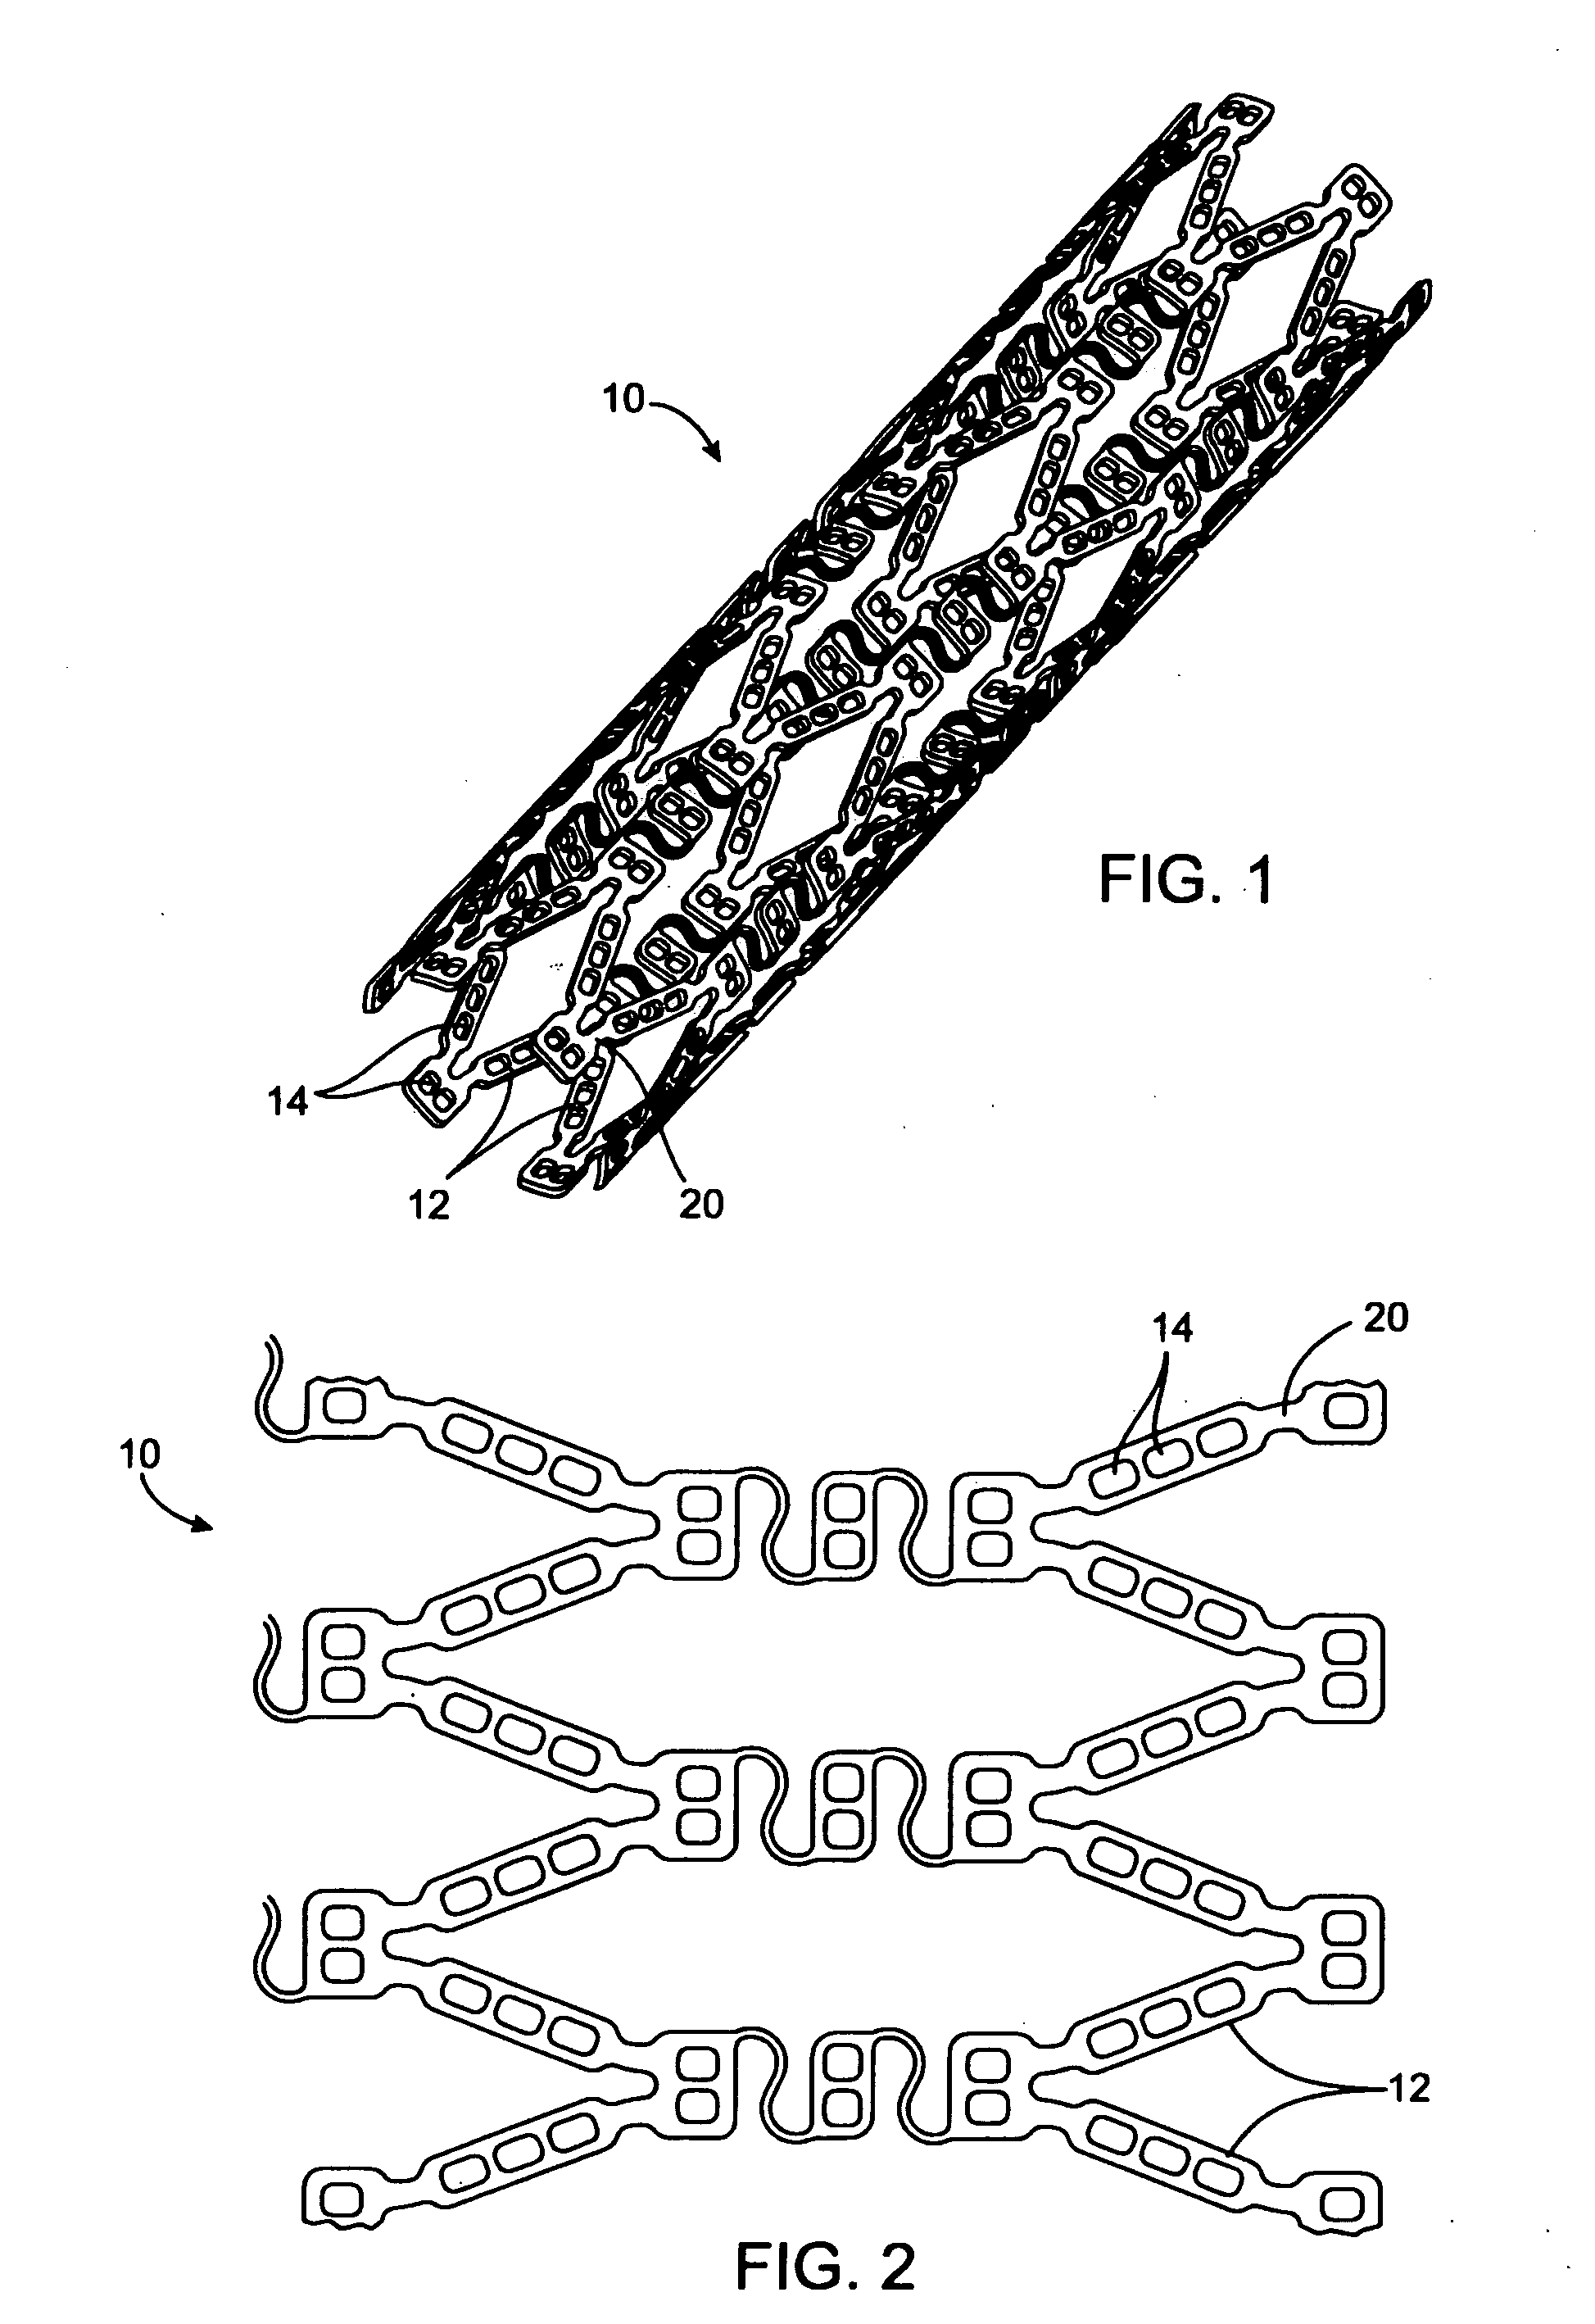 Methods and systems for delivering immunosuppressant and anti-inflammatory agents from a stent